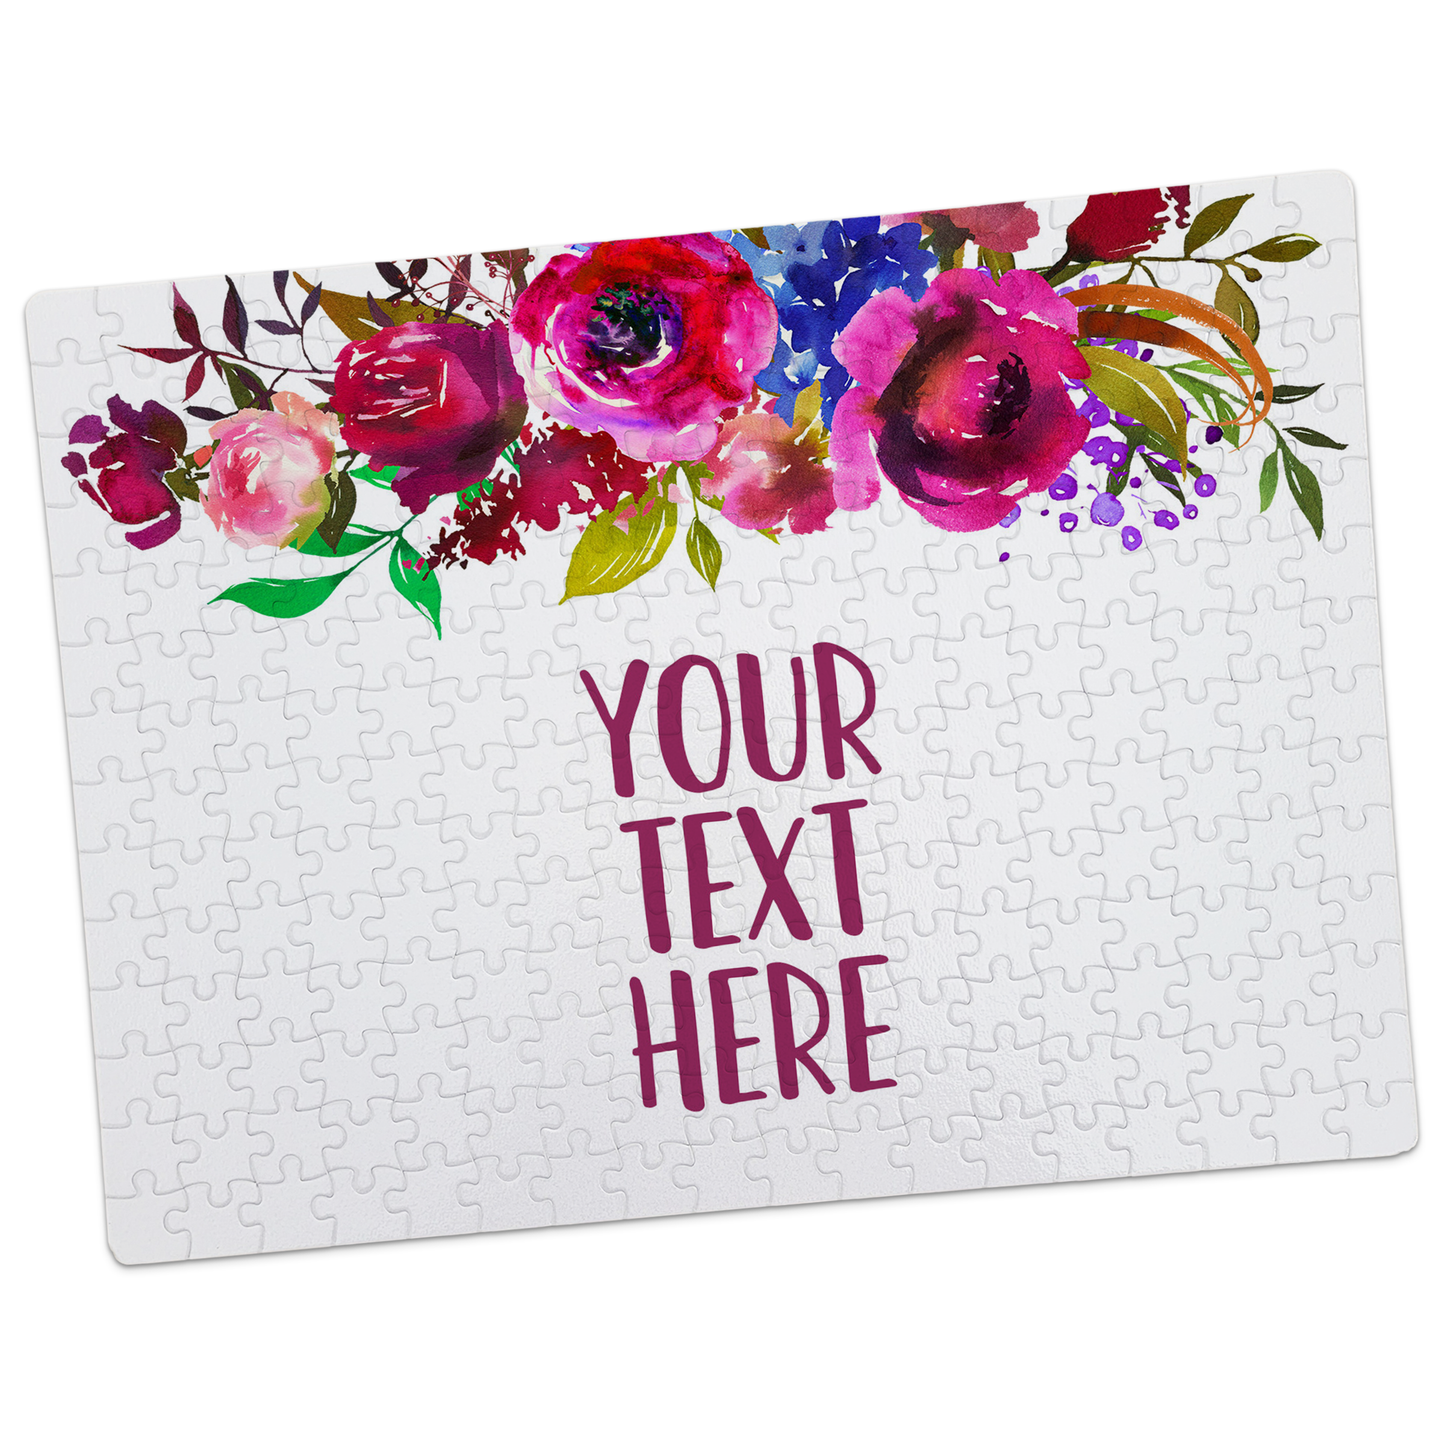 Create Your Own Puzzle - Floral Design - CYOP0109